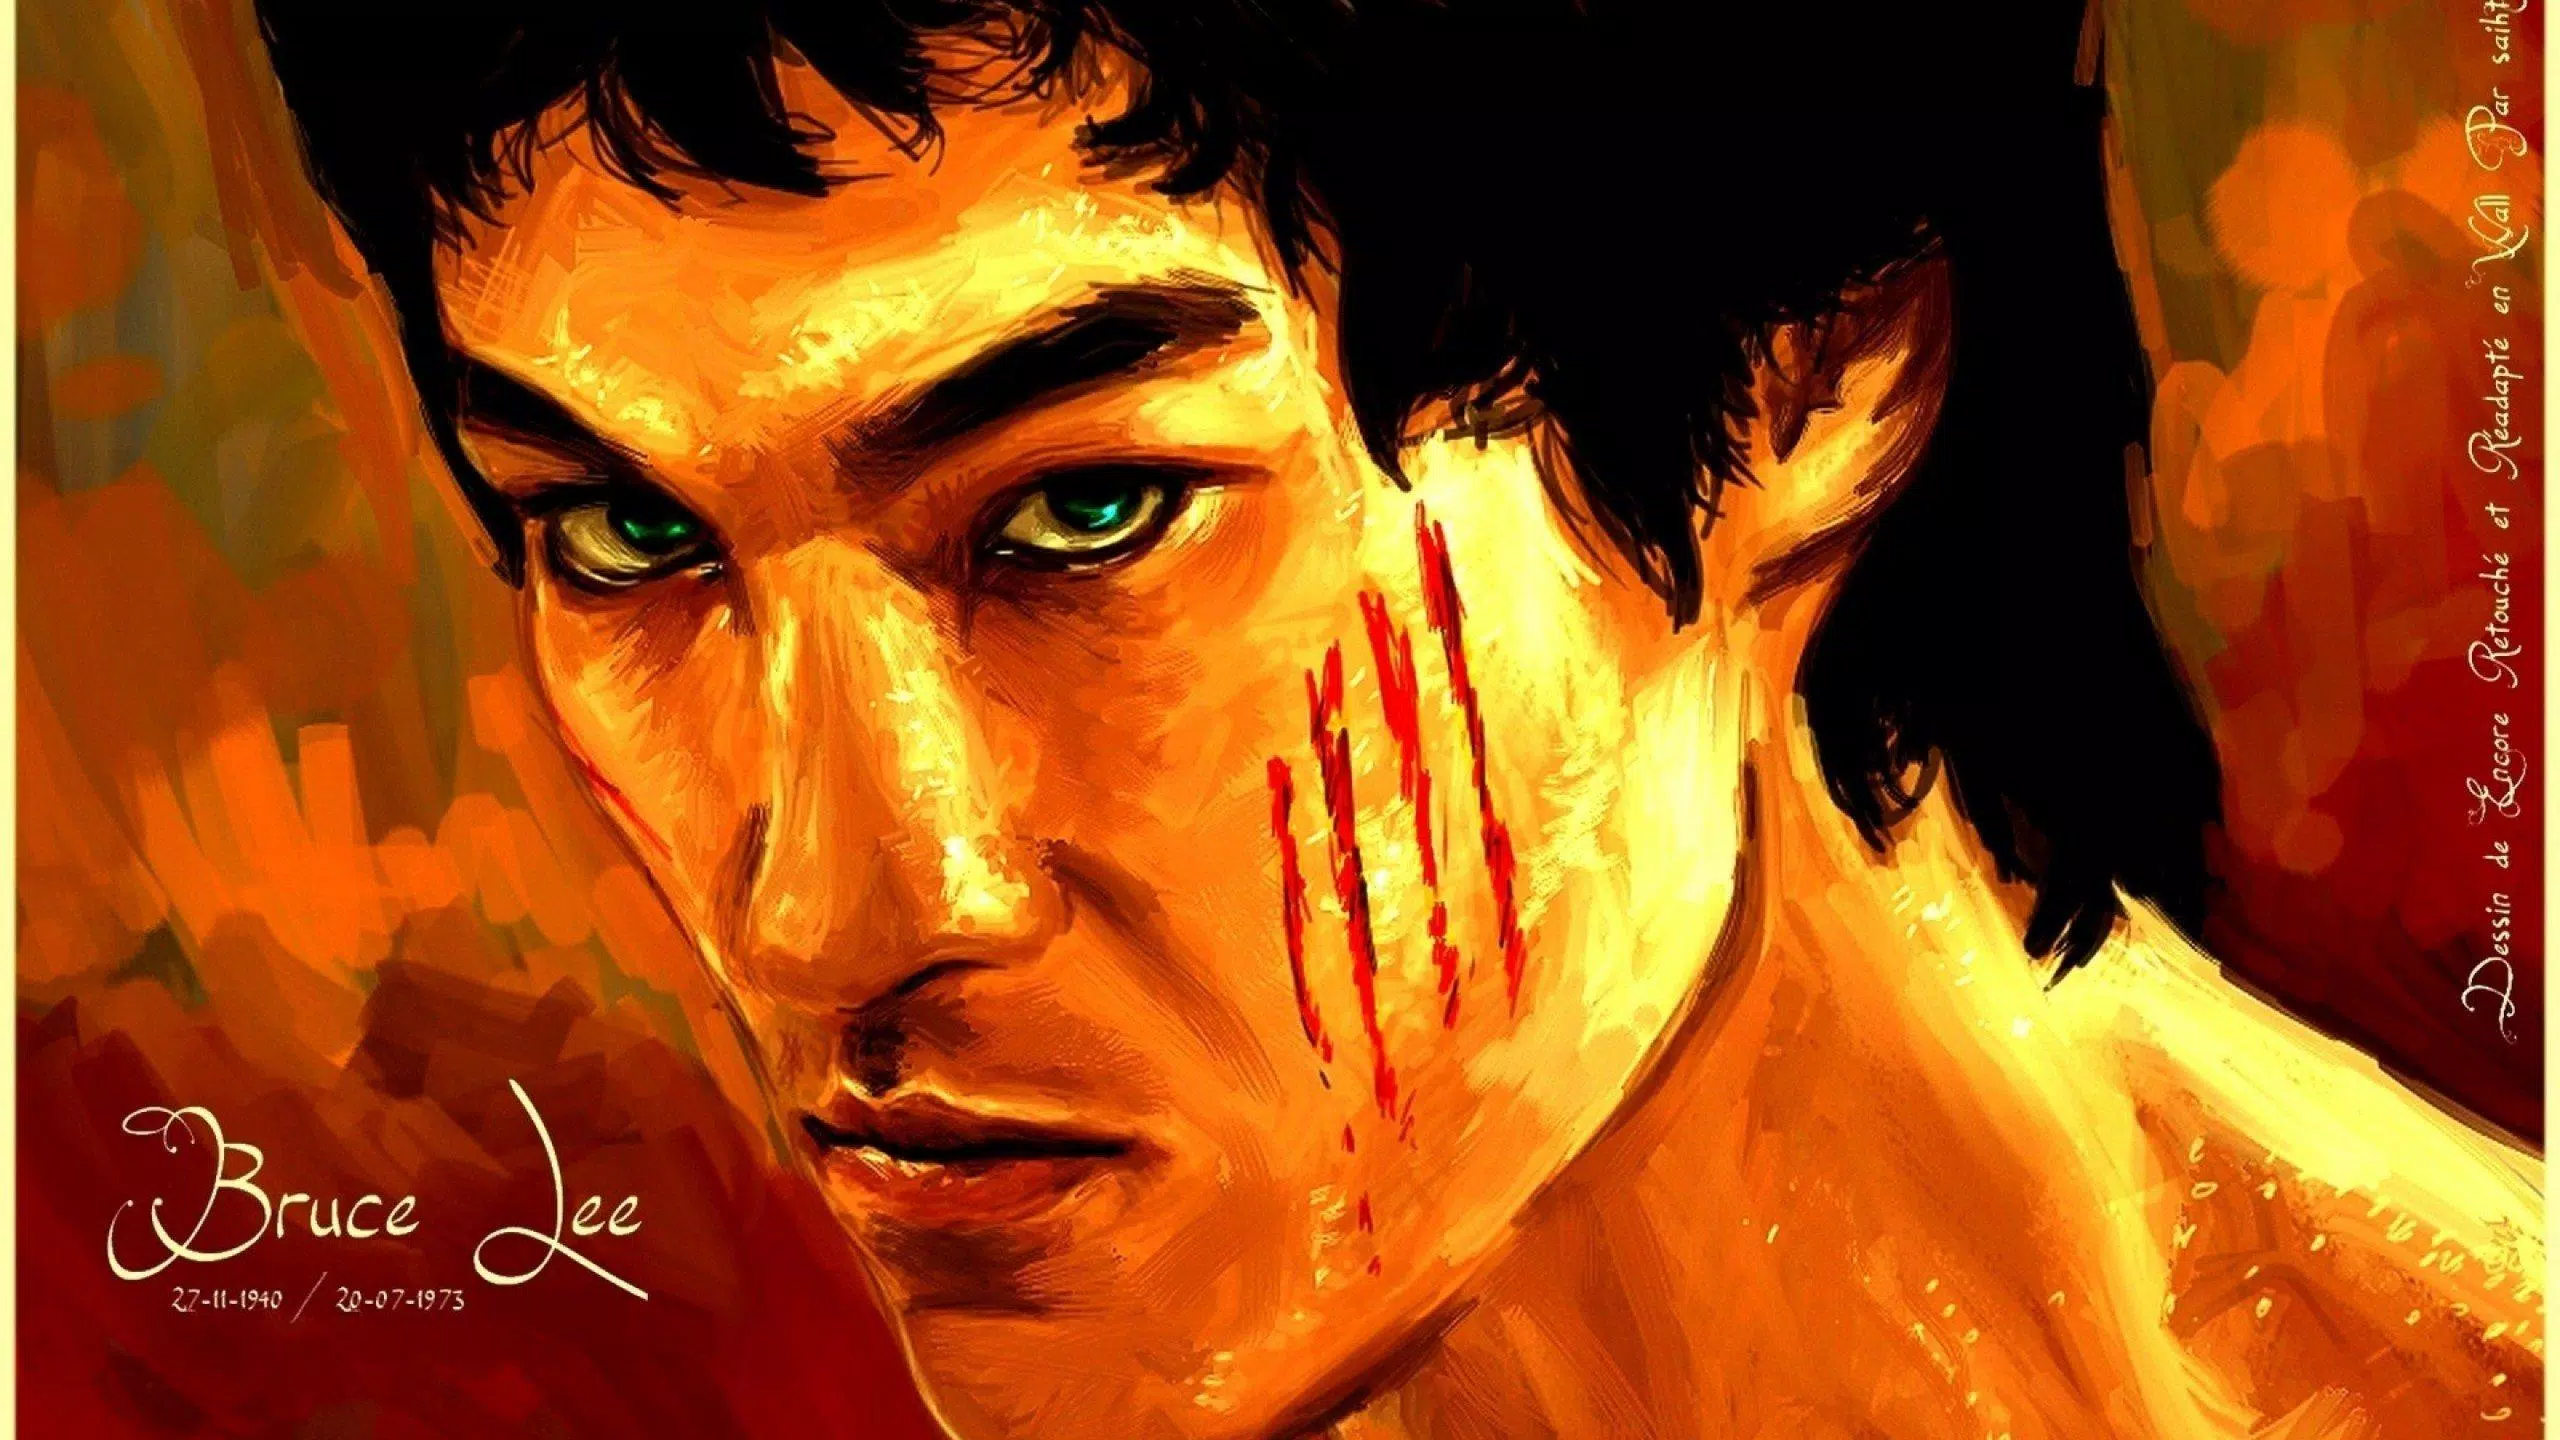 Bruce Lee Wallpaper Art Apk For Android Download